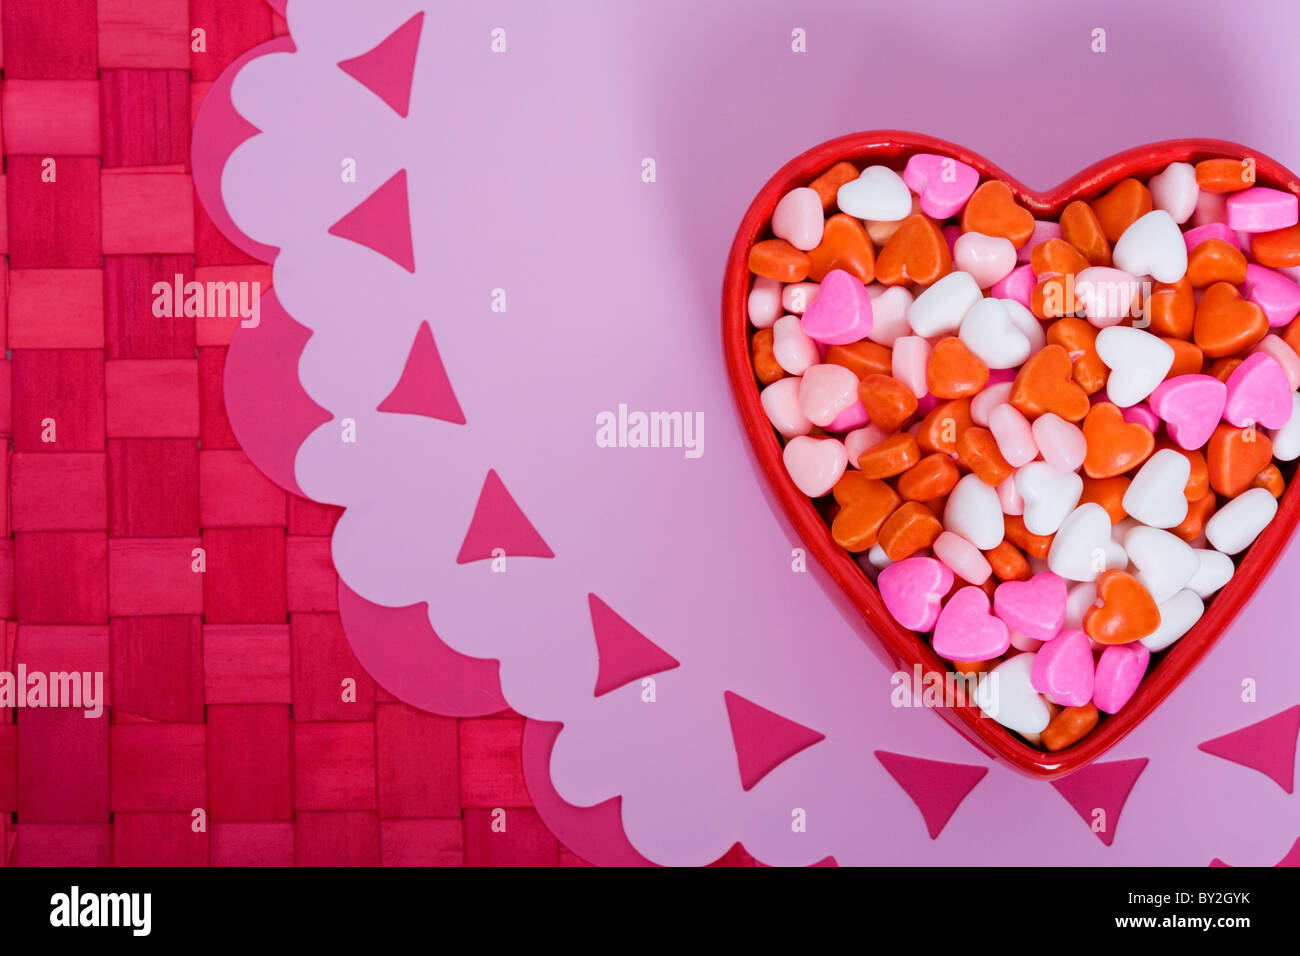 Heart shaped sweets in a heart shaped dish for Valentine's Day Stock Photo